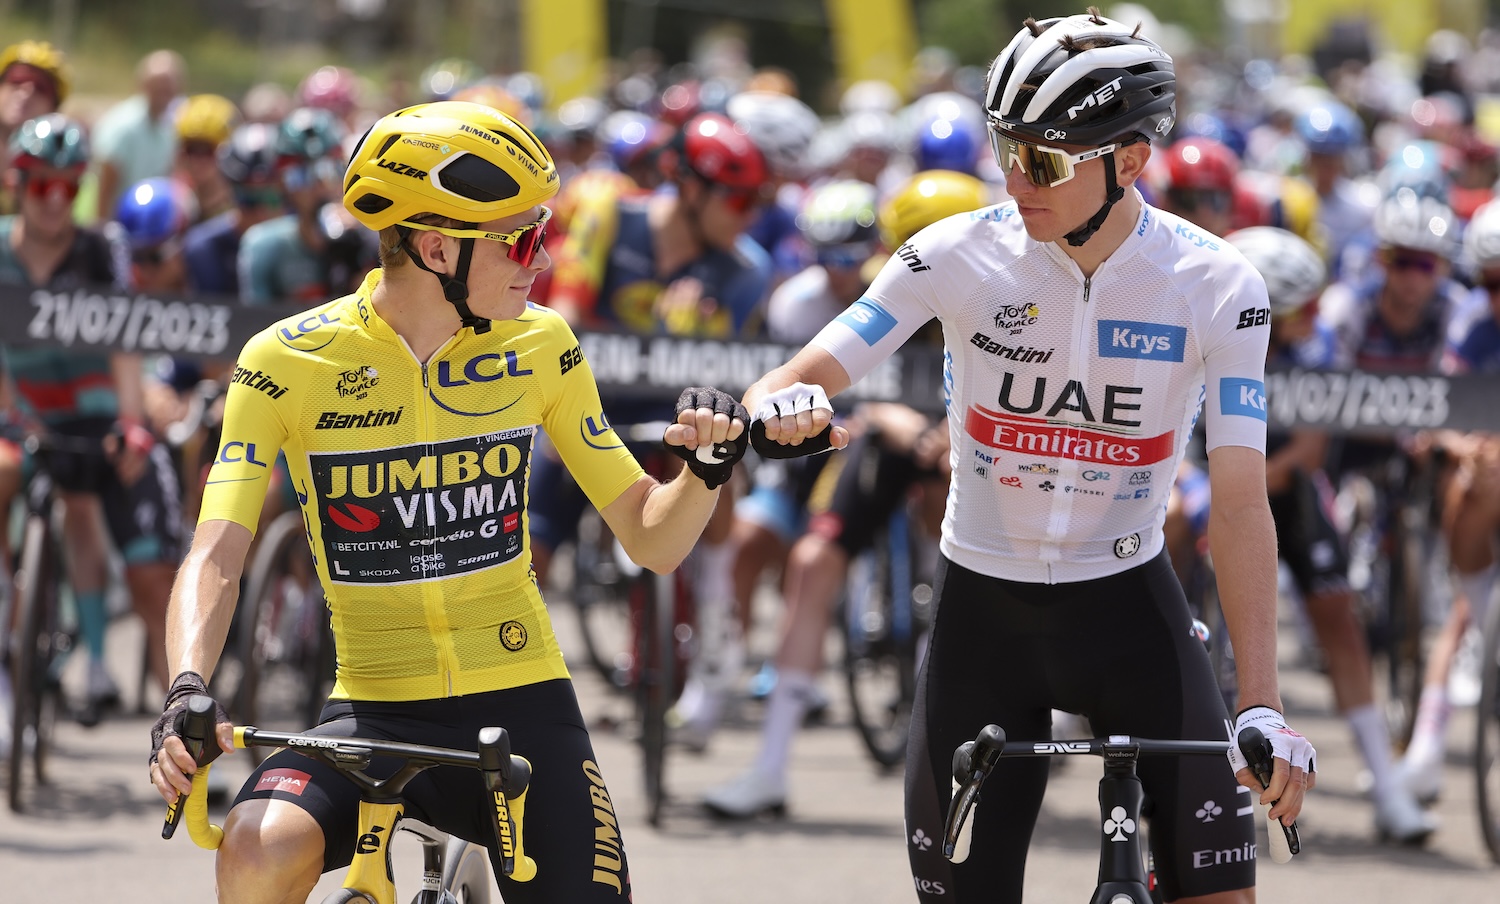 MOIRANS-EN-MONTAGNE, FRANCE - JULY 21: Yellow jersey of race leader Jonas Vingegaard of Denmark and Jumbo - Visma salutes White jersey of best young rider Tadej Pogacar of Slovenia and UAE Team Emirates at the start of stage nineteen of the 110th Tour de France 2023, a 172.8km stage from Moirans-en-Montagne to Poligny / #UCIWT / on July 21, 2023 in Moirans-en-Montagne, France. (Photo by Jean Catuffe/Getty Images)